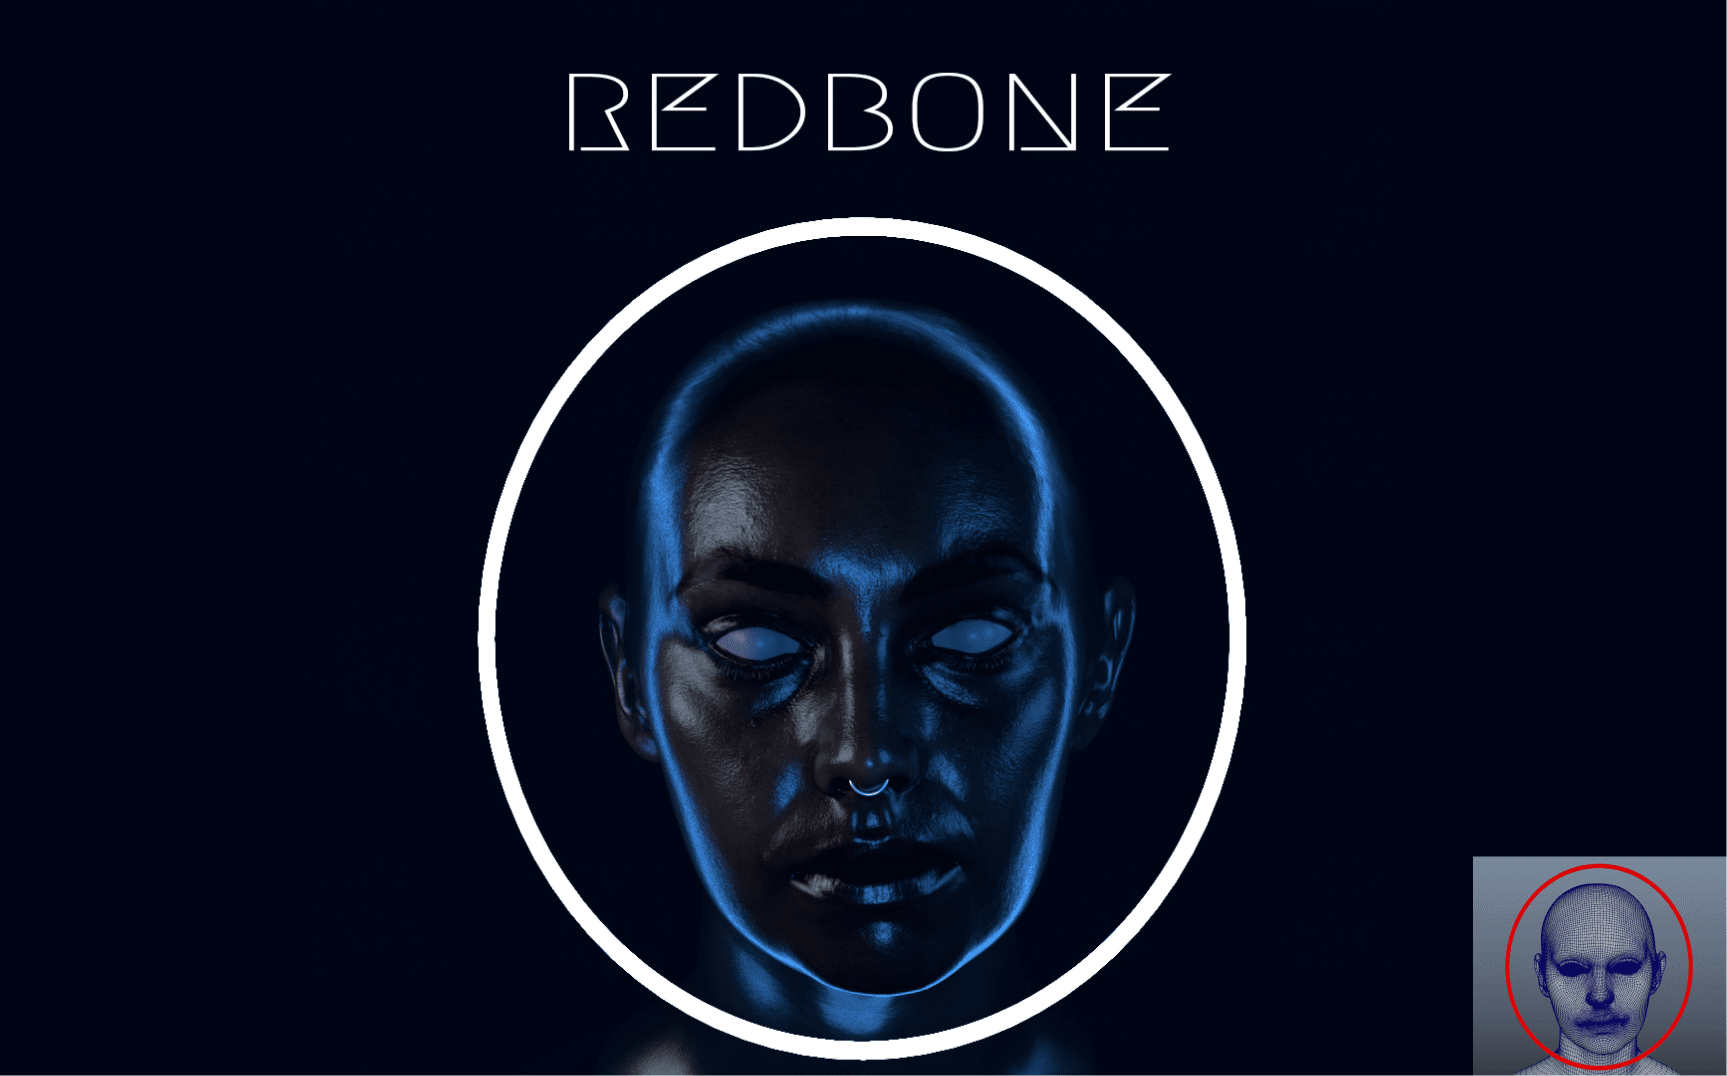 3D recreation of artwork of redbone song by Donald Glover